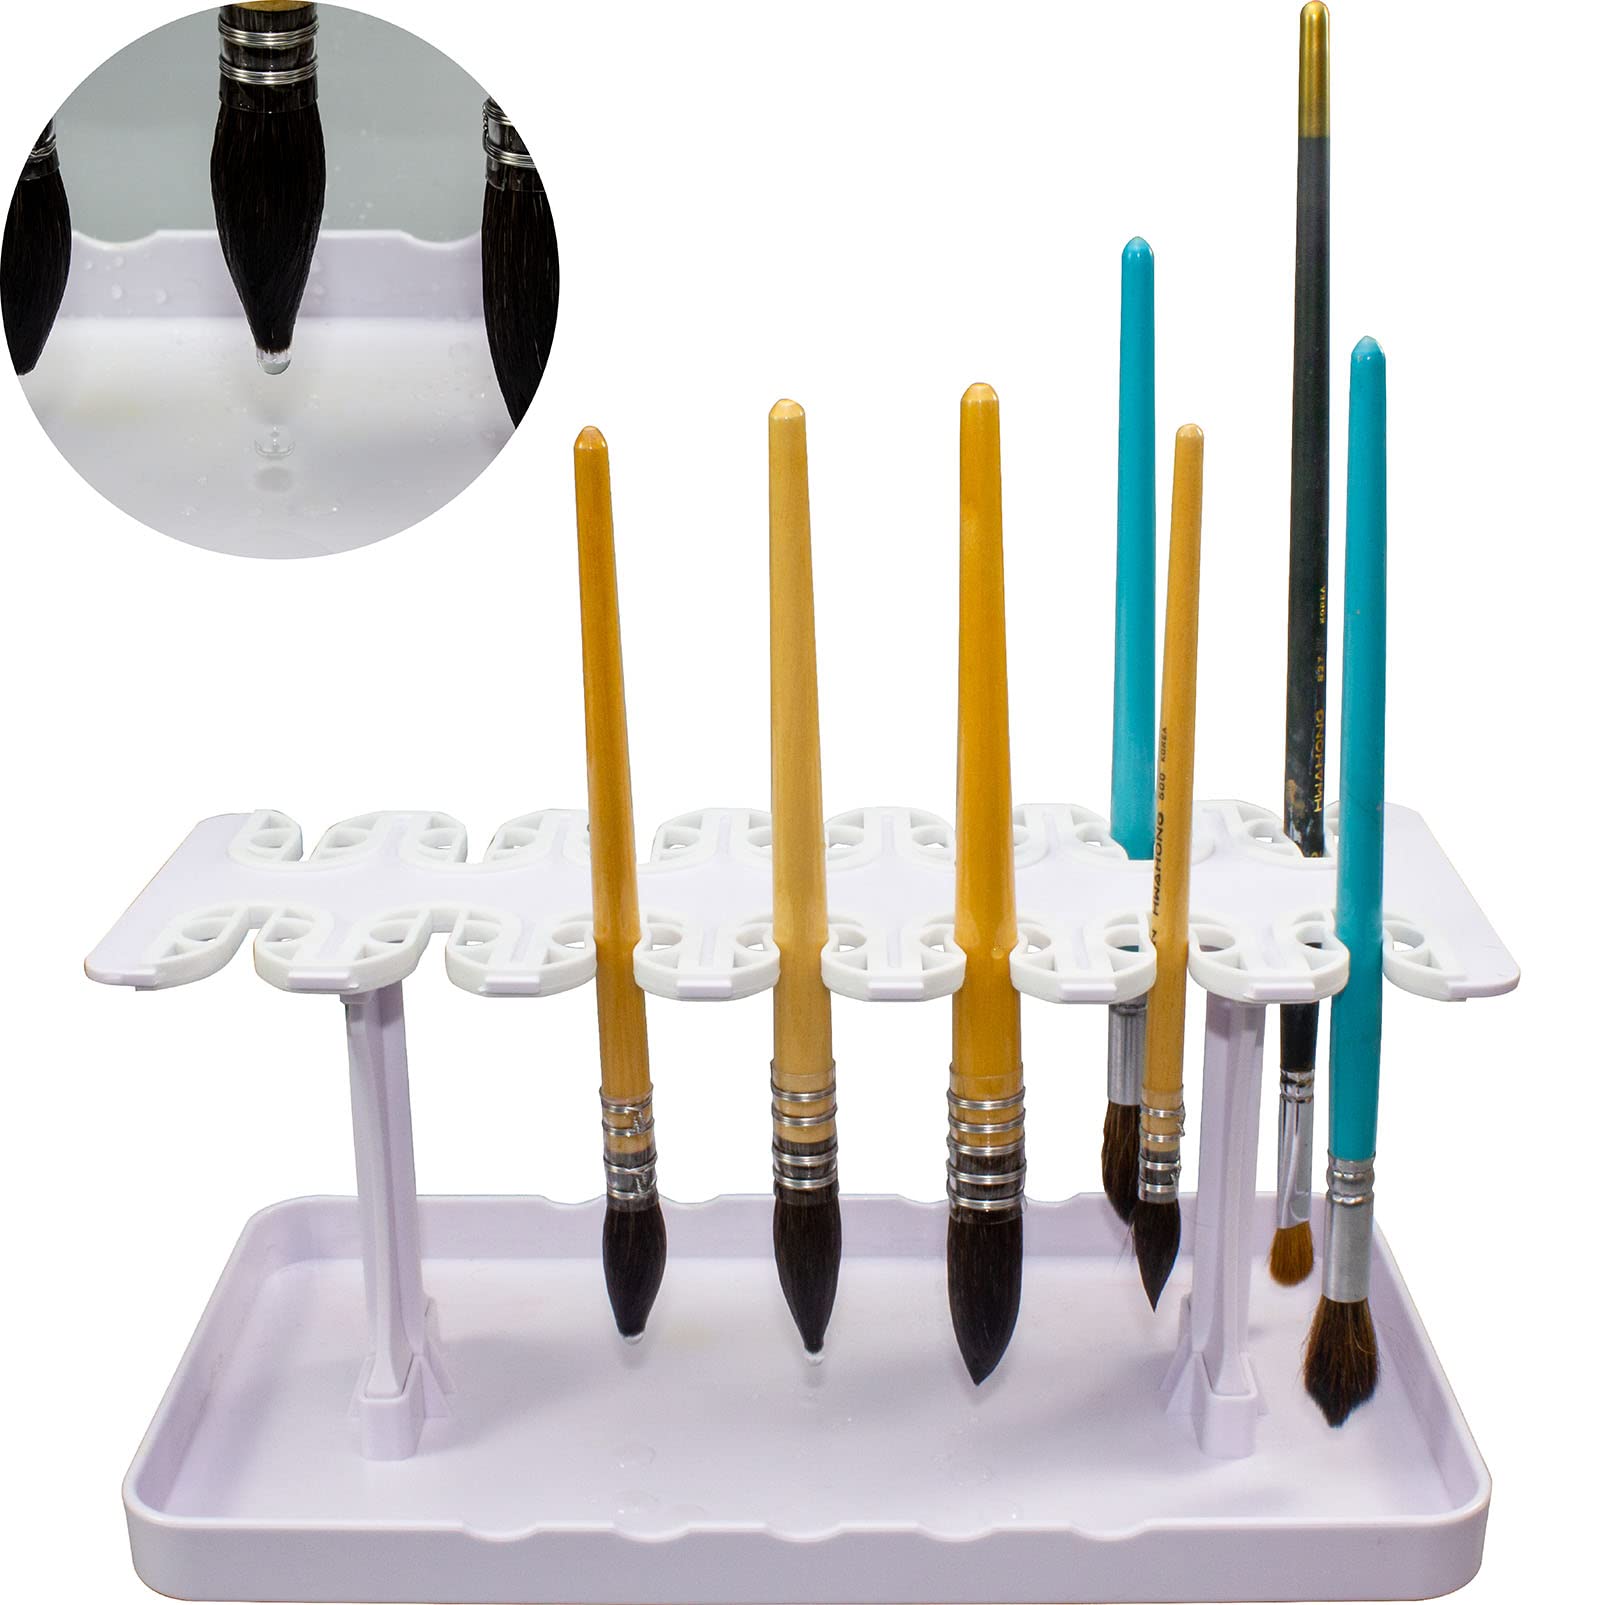  UKCOCO 1pc Eight Rows of Hole Wooden Base Paint Brush Drying  Rack Makeup Brush Dryer Stand Makeup Brush Drying Rack Artist Paint Brush  Holder Pine Wood Desktop Tools for Reparing 